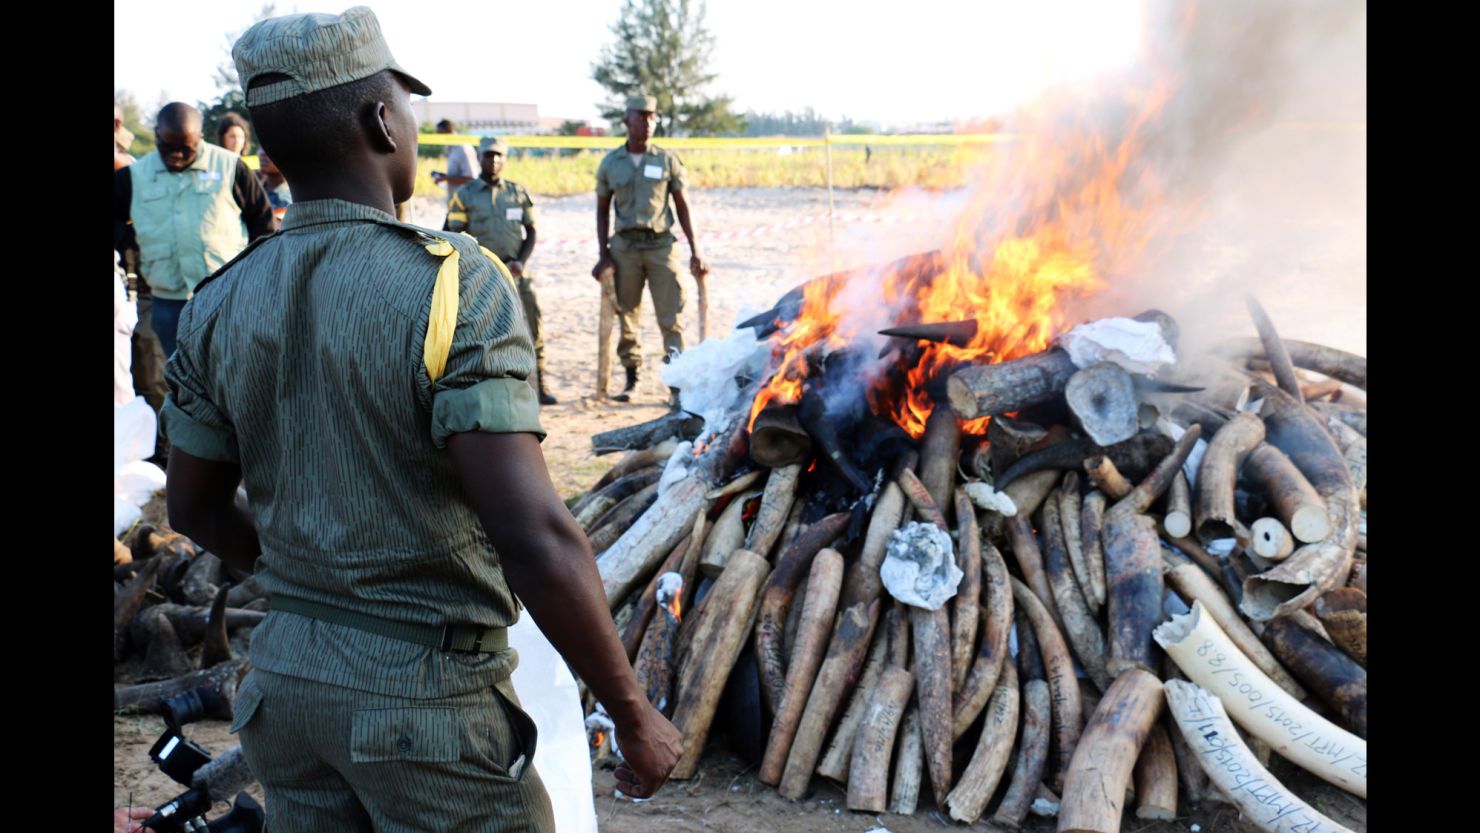 Mozambican authorities  stand near a burning pile of ivory and rhino horns in Maputo on July 6.